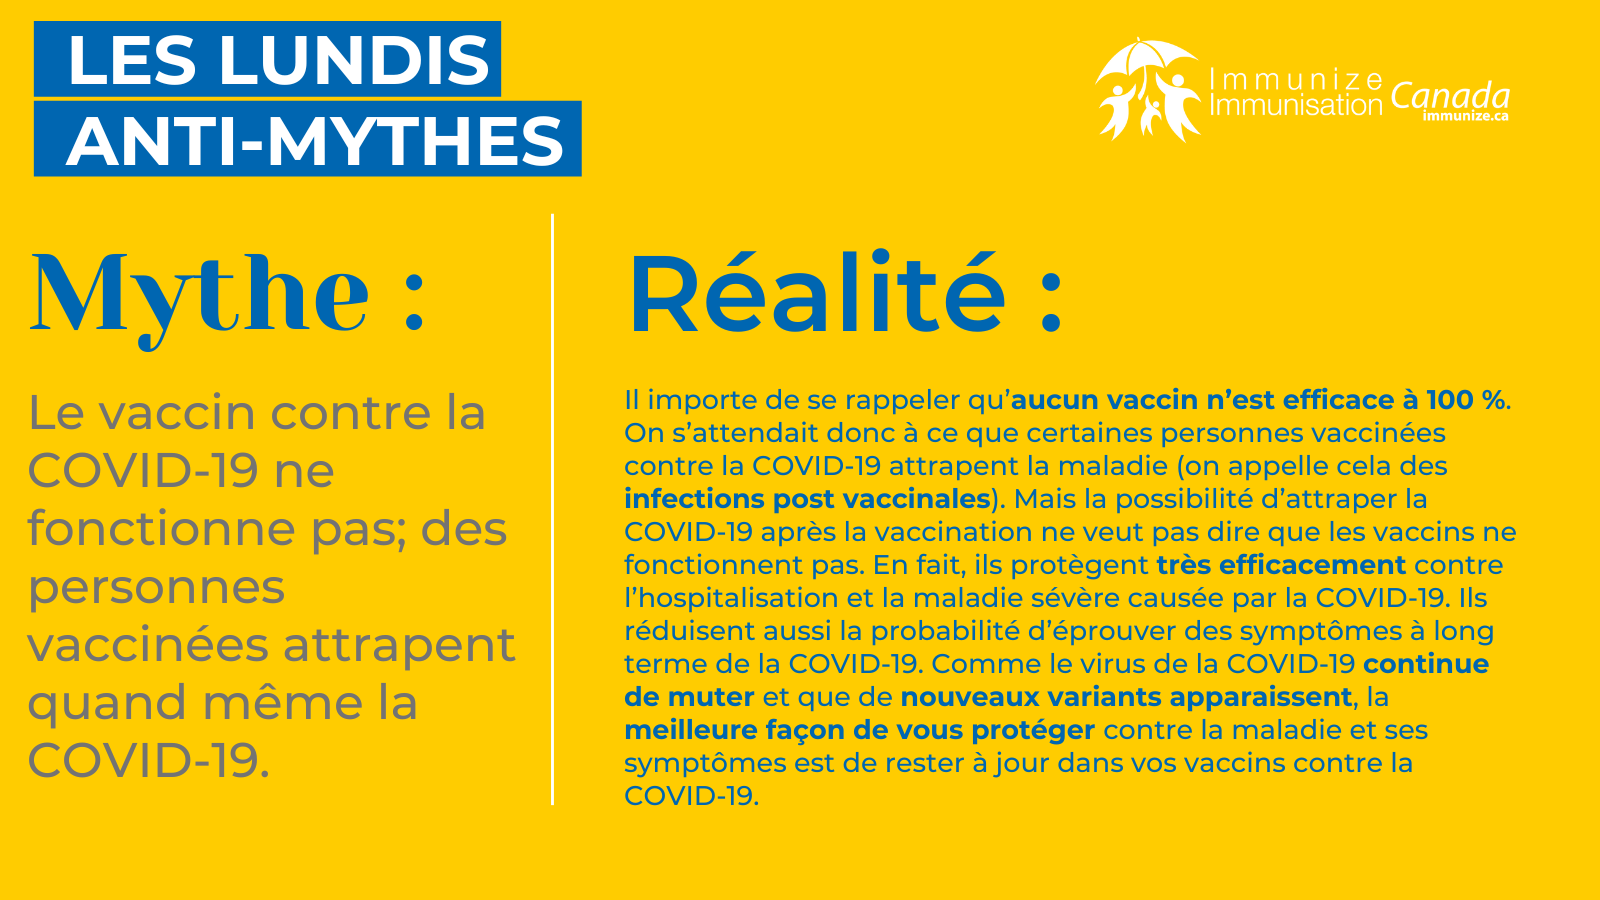 Les lundis anti-mythes - COVID-19 - image 13 pour Twitter/X